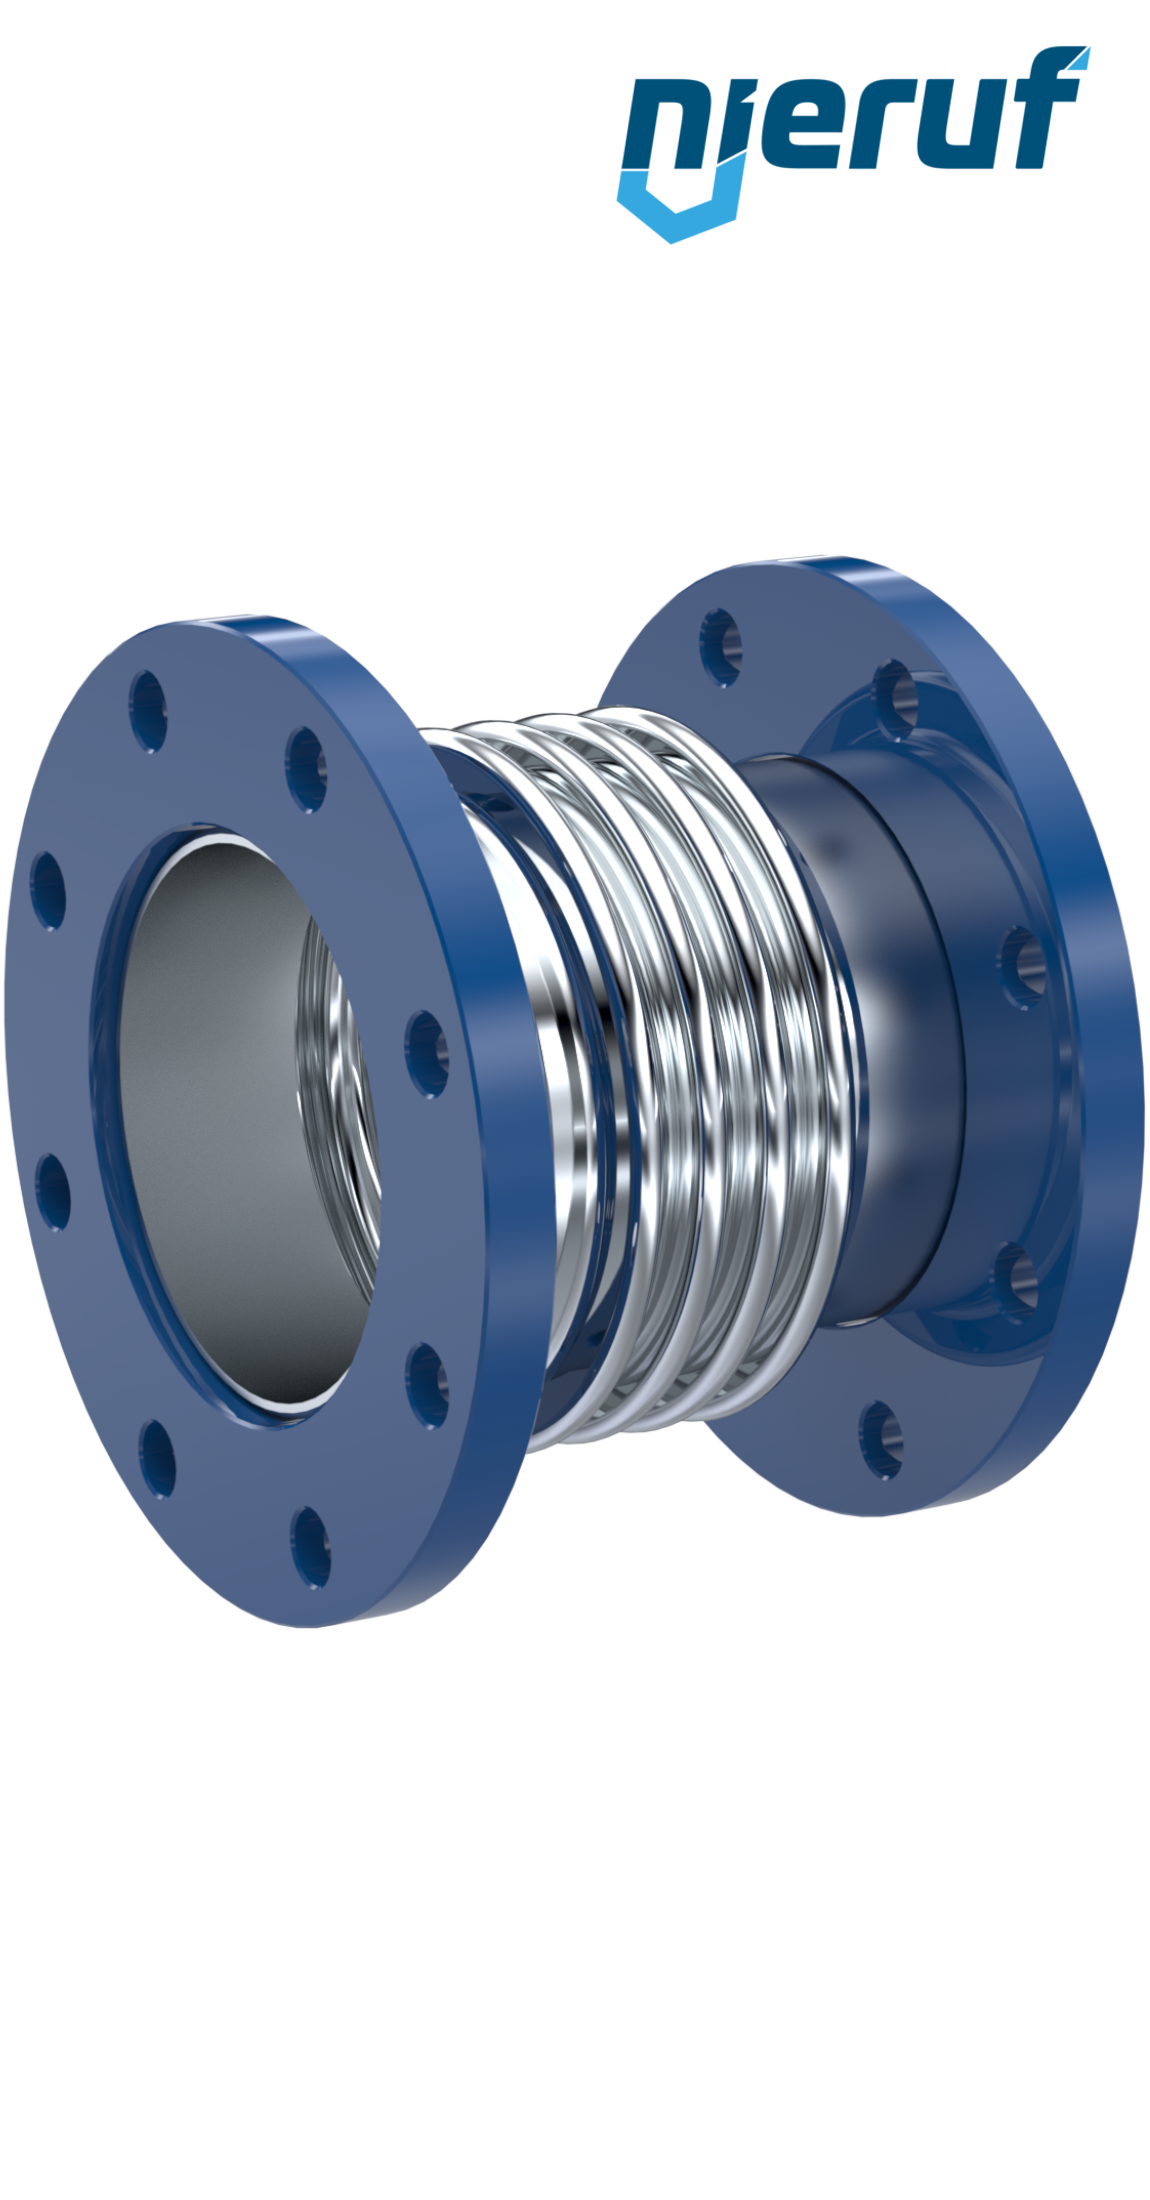 Axial expansion joint DN125 type KP05 fixed flanges and stainless steel-bellows